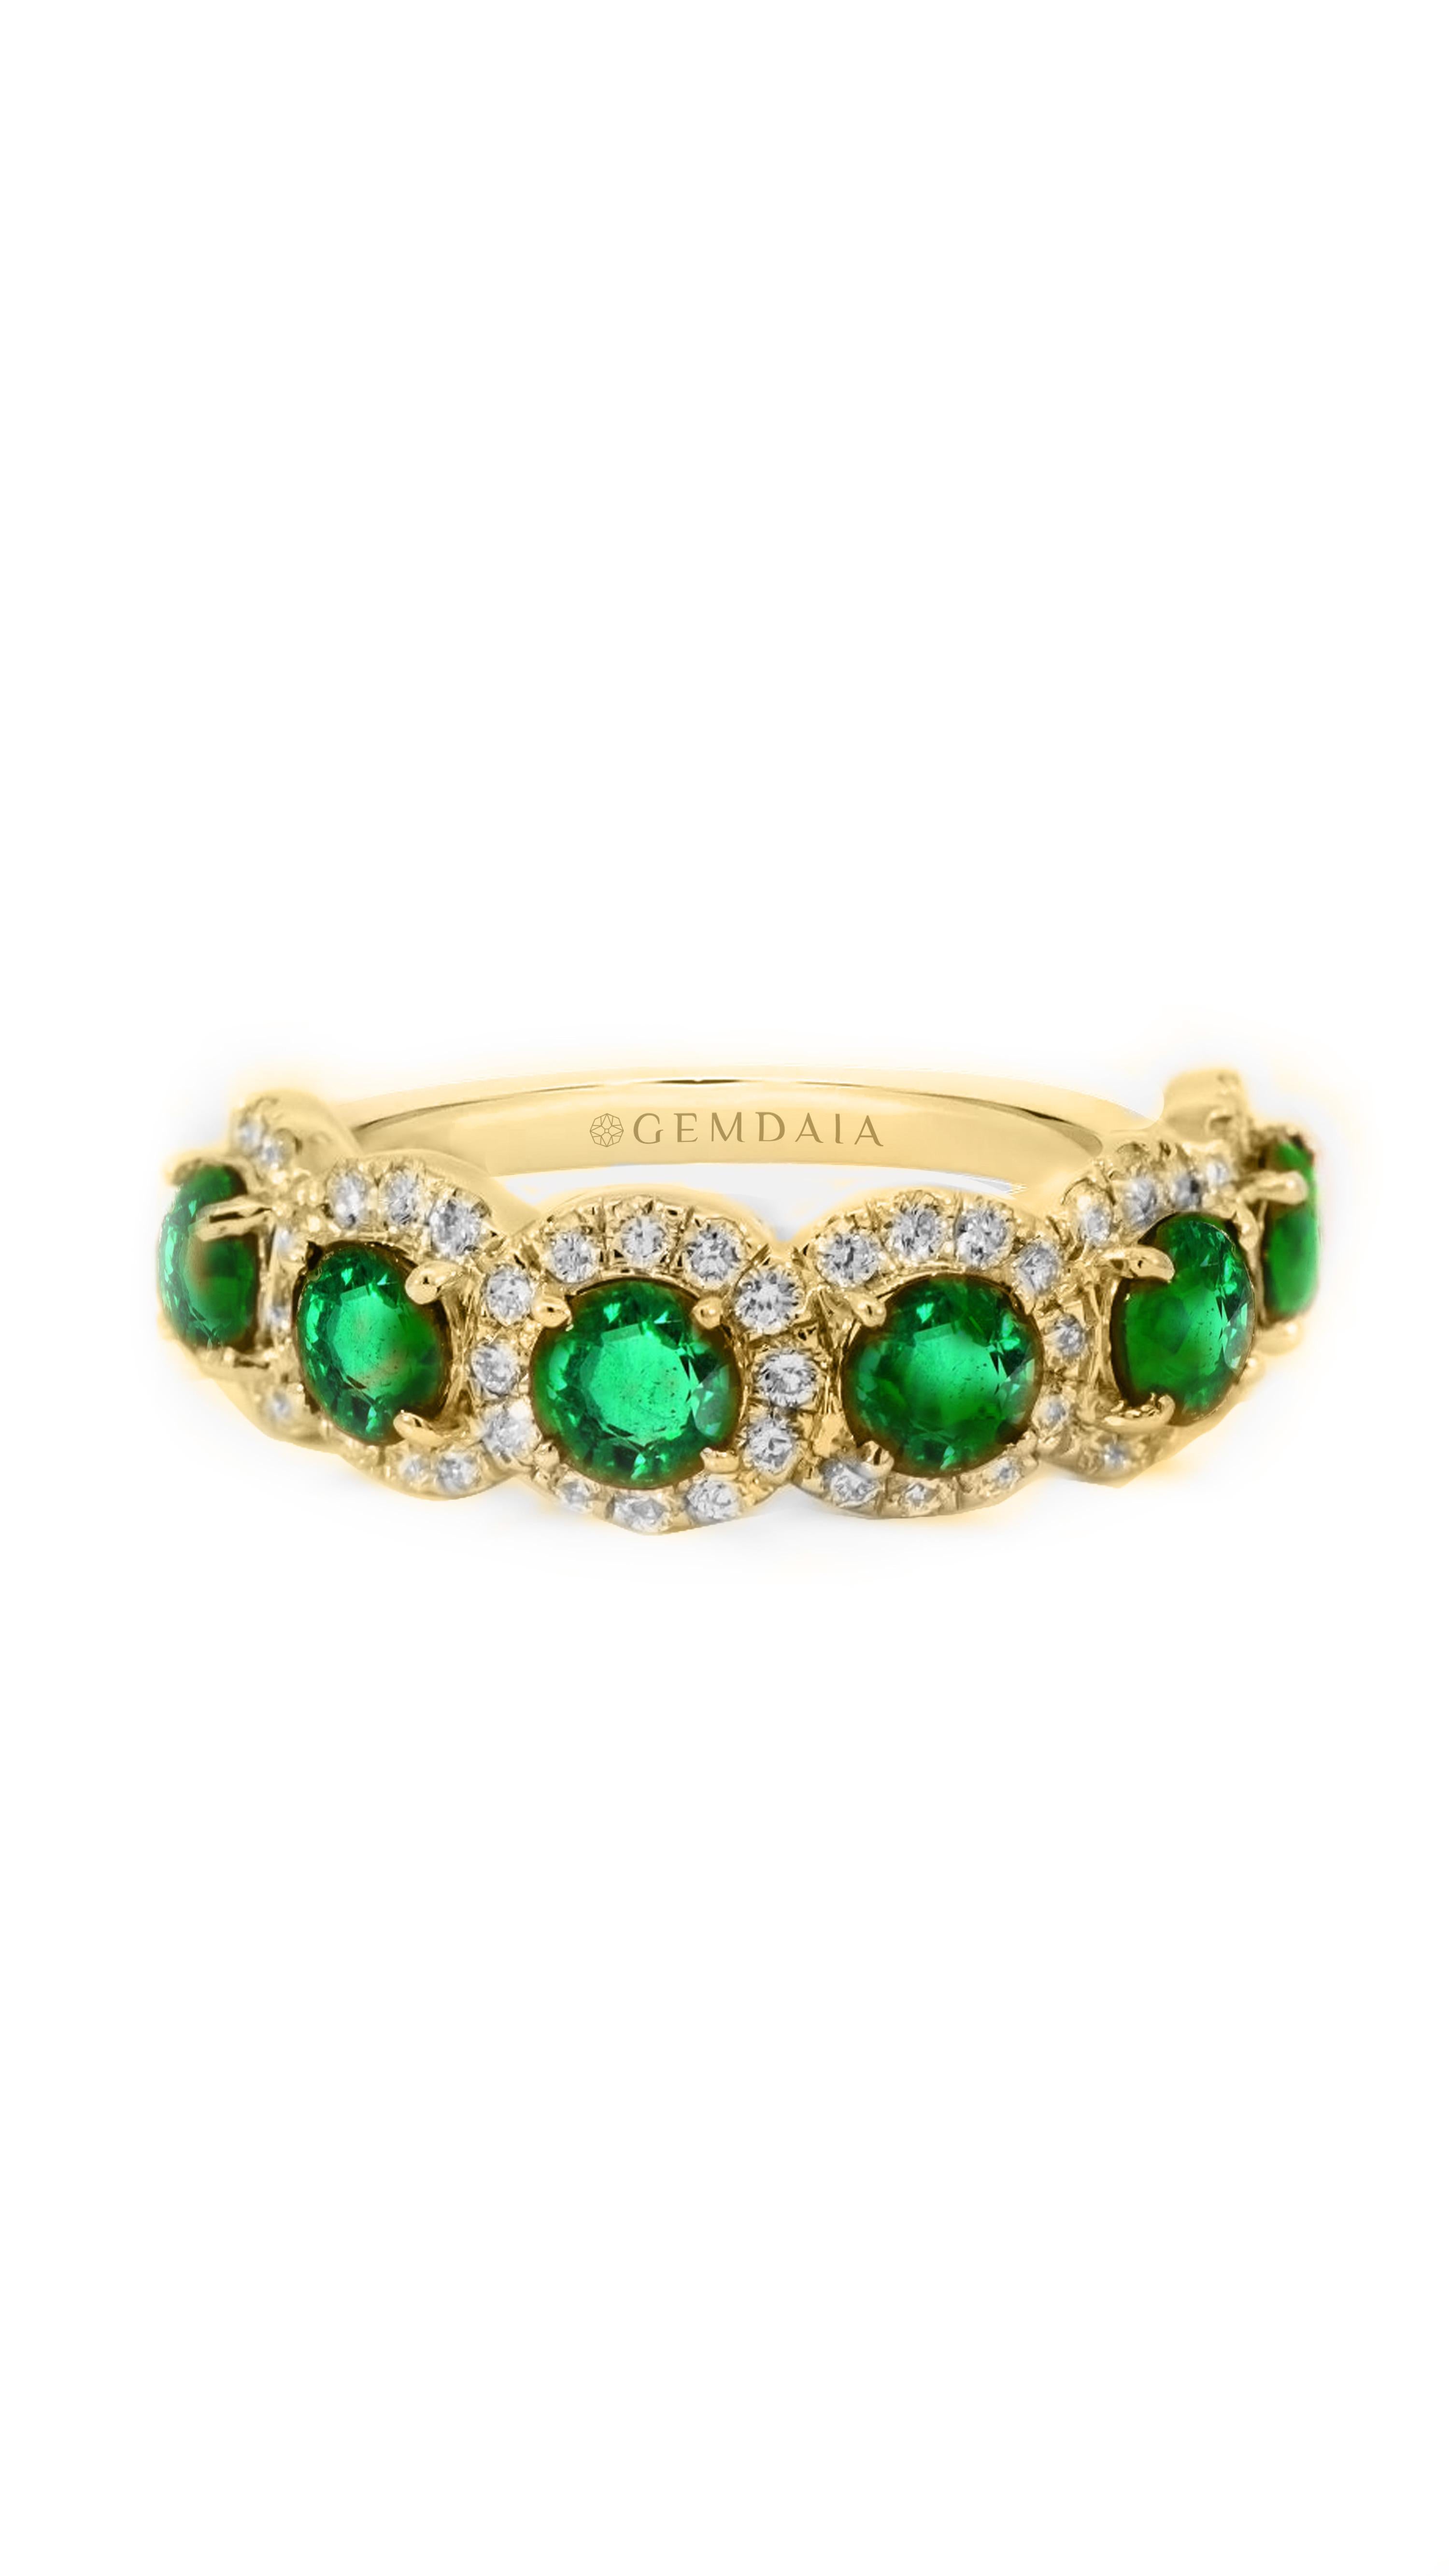 6 enchanting natural emeralds encircled by sparkling diamonds, meticulously crafted in solid gold. Refined elegance redefined.

Perfect for May celebrations, birthdays, or as a meaningful gift, this ring captures the essence of nature's beauty and